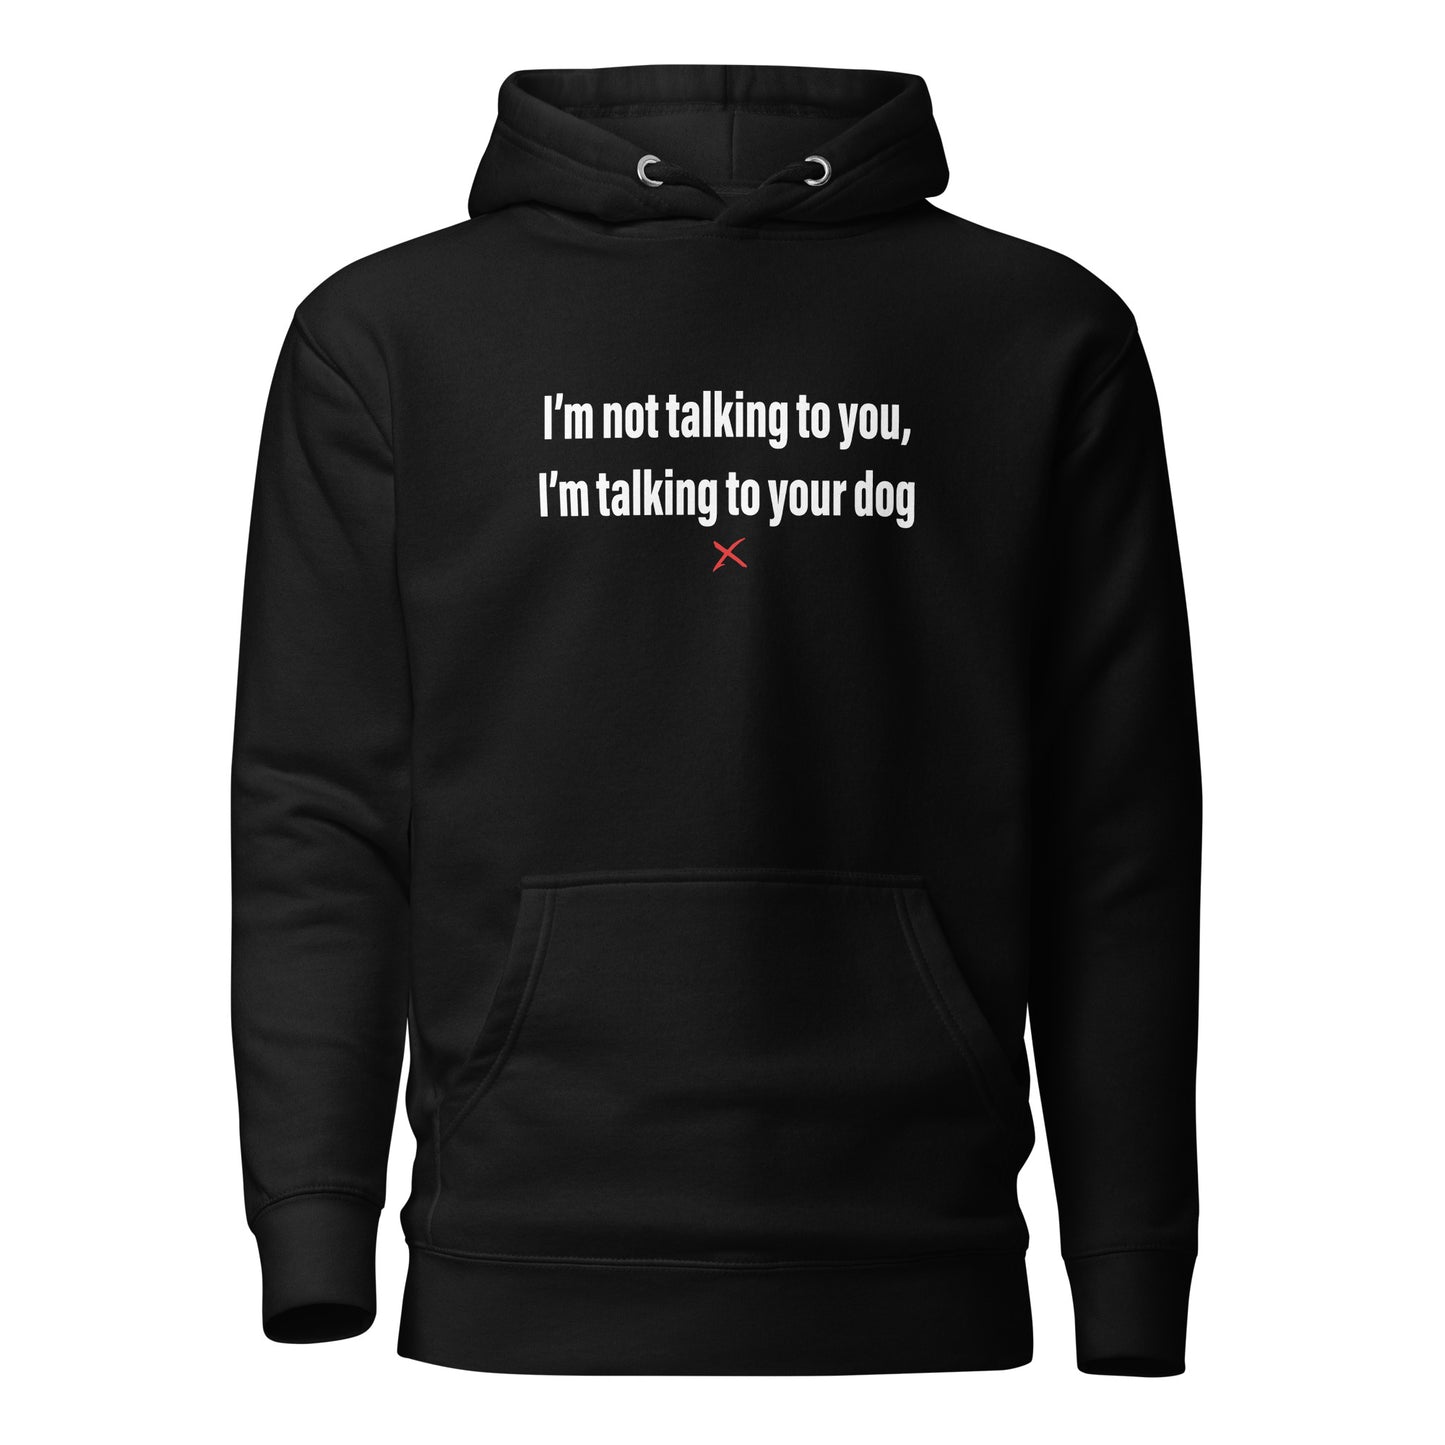 I'm not talking to you, I'm talking to your dog - Hoodie